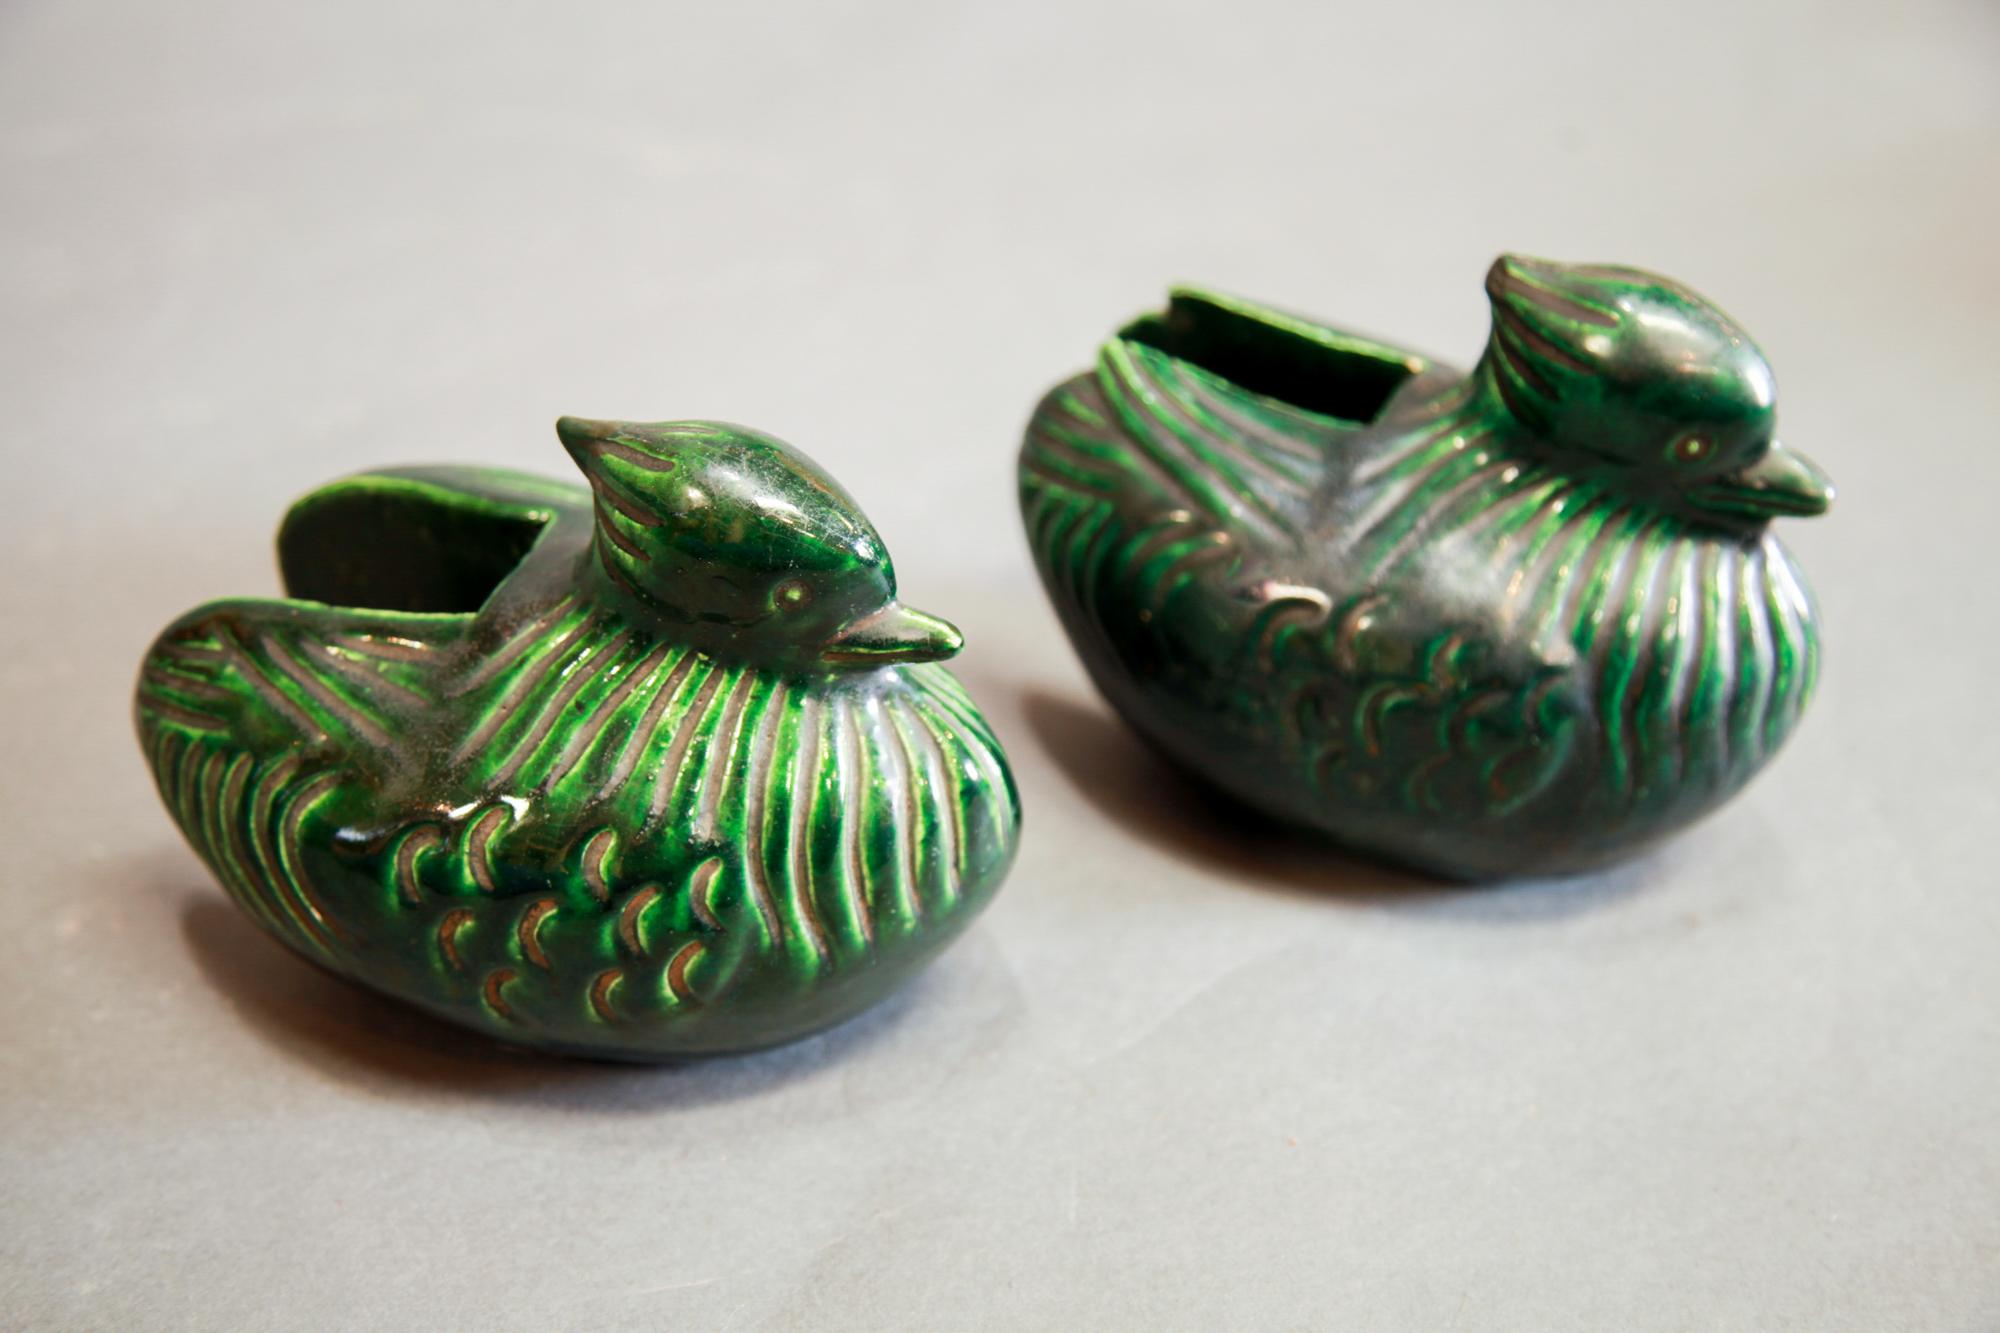 Pair of Oribe Mandarin Ducks screen holders, Japanese, Meiji period.

 Mandarin ducks shape, glazed ceramic with cutouts to allow ends of standing screens to securedly rest inside them. Oribe kiln is one of the oldest Japanese kilns and mostly